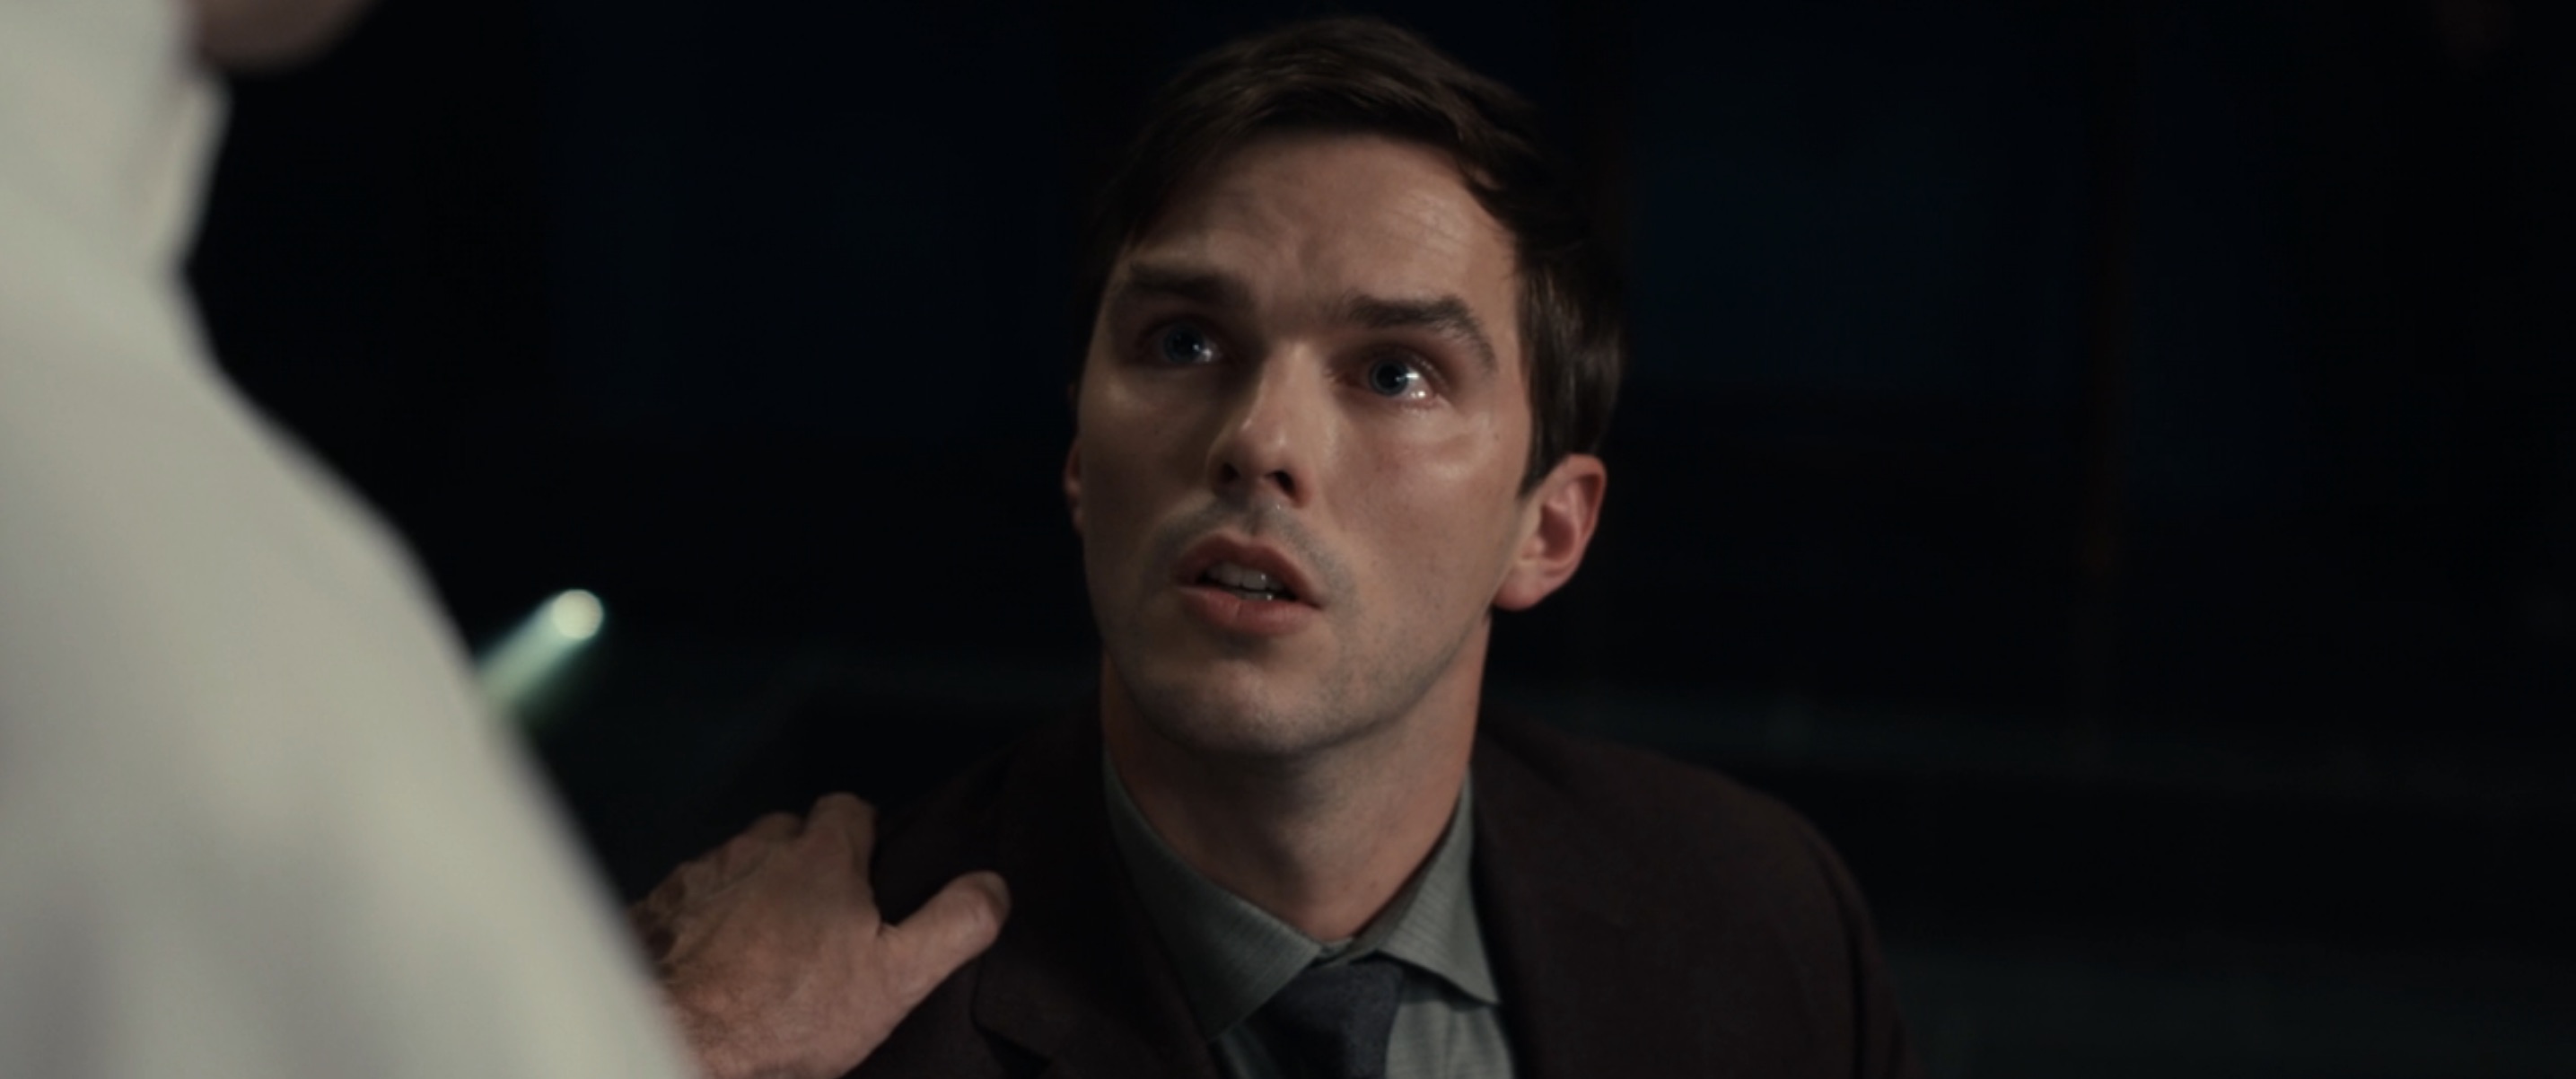 The Menu Cast on HBO Max - Nicholas Hoult as Tyler